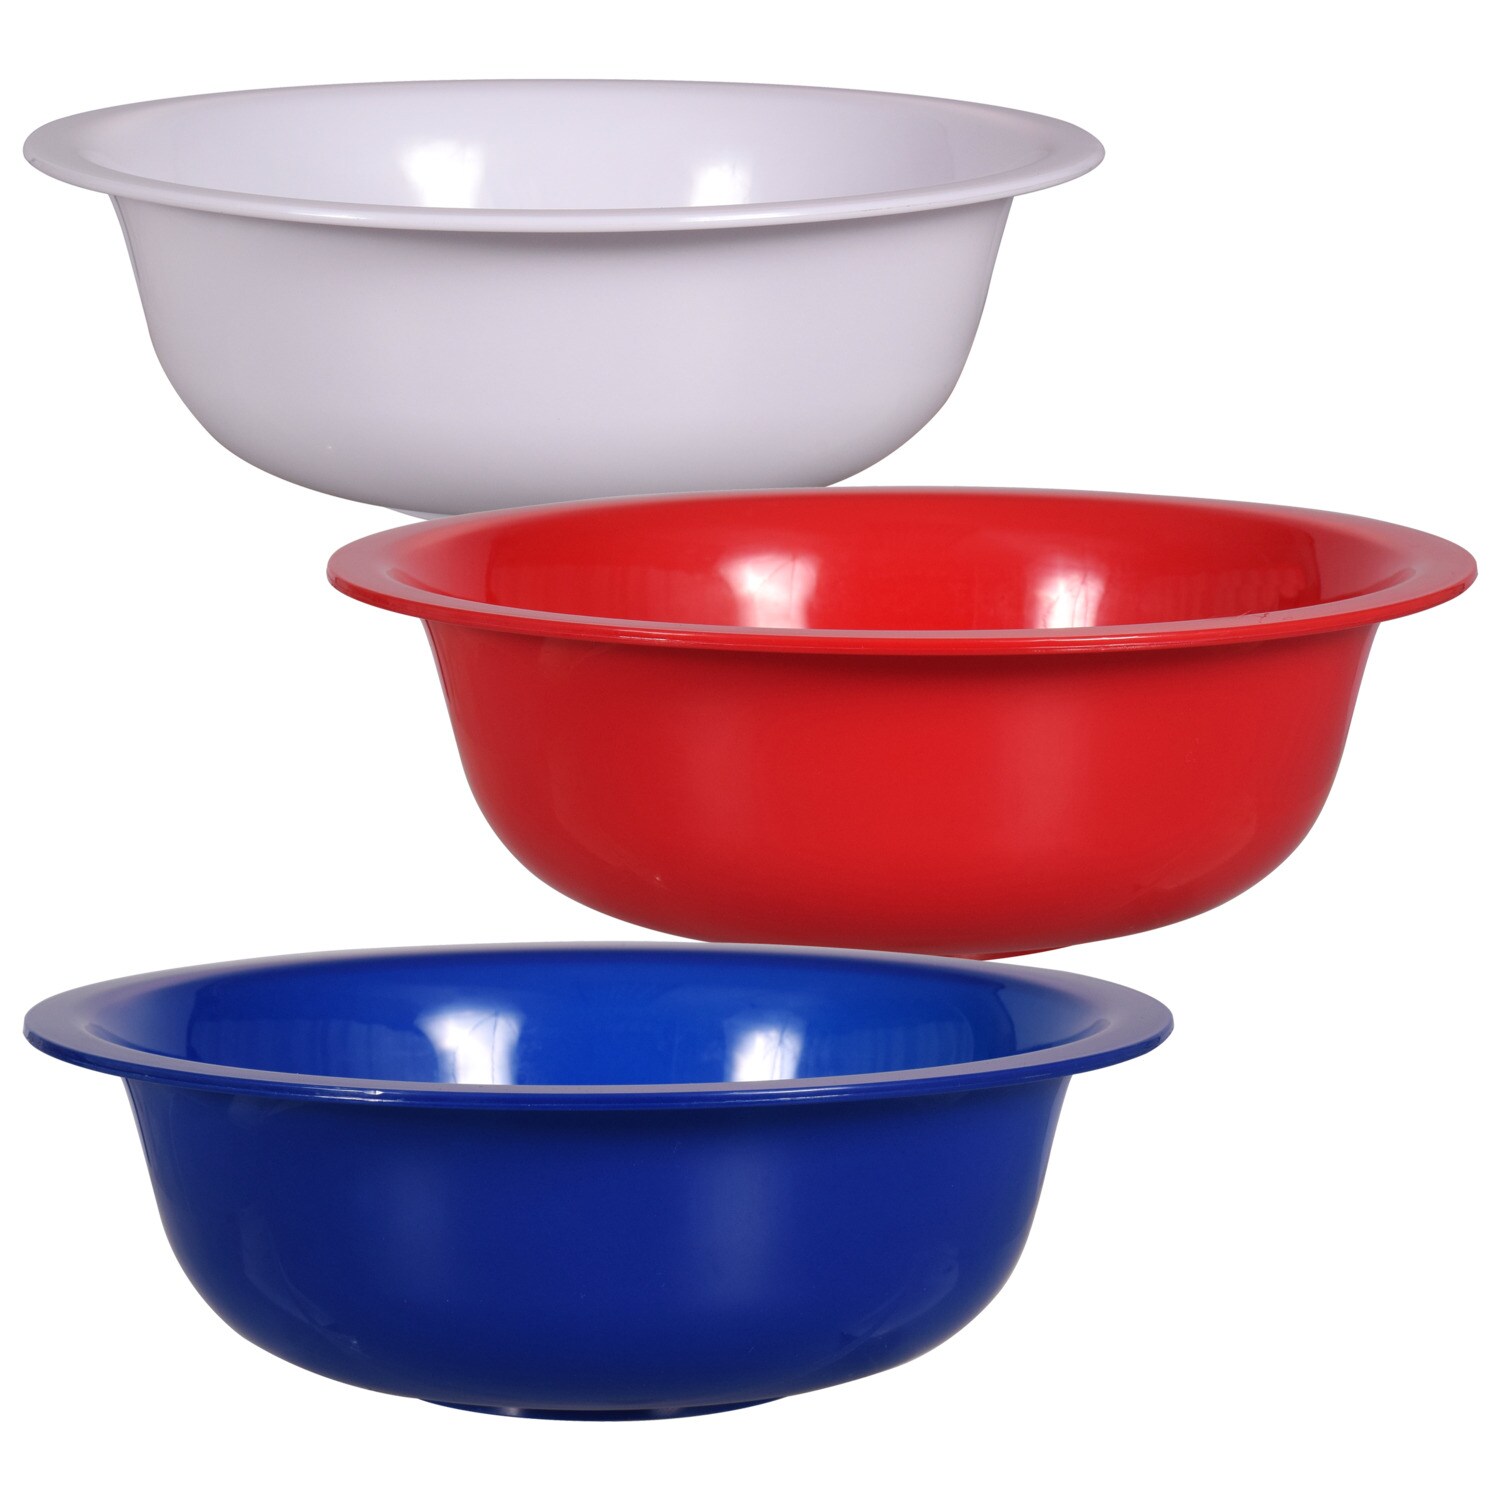 Chips Disposable Serving Bowls Saled Great for Snack Summer Colors Candy Dish 4 Pack Plastic Bowl